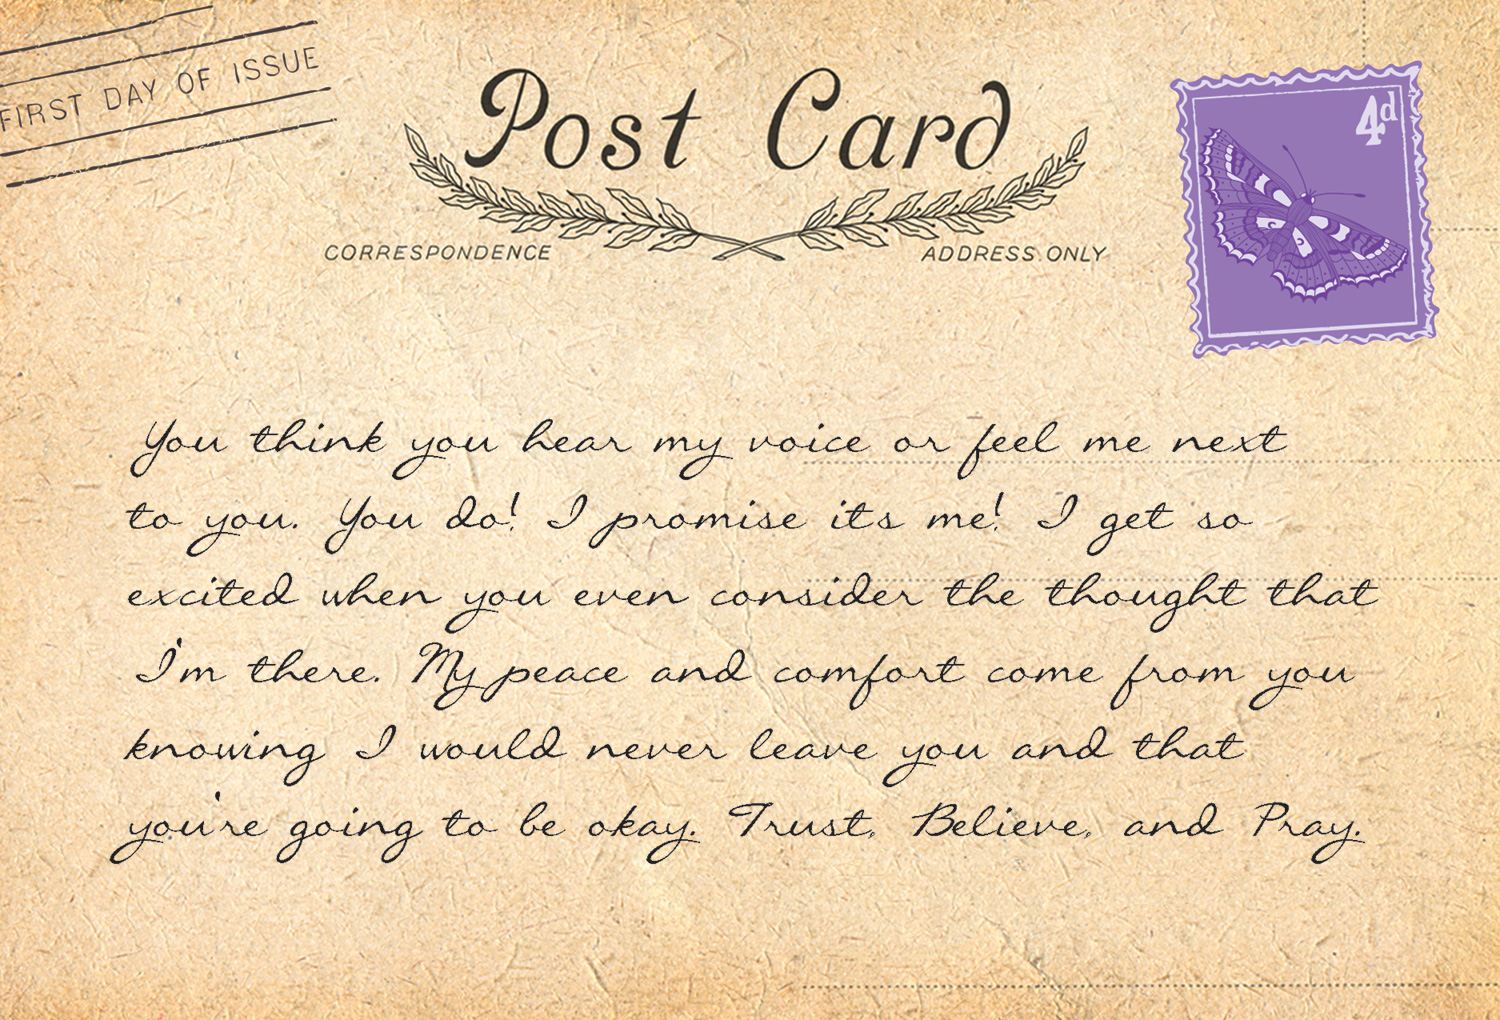 POSTCARDS FROM HEAVEN 2 - back 17